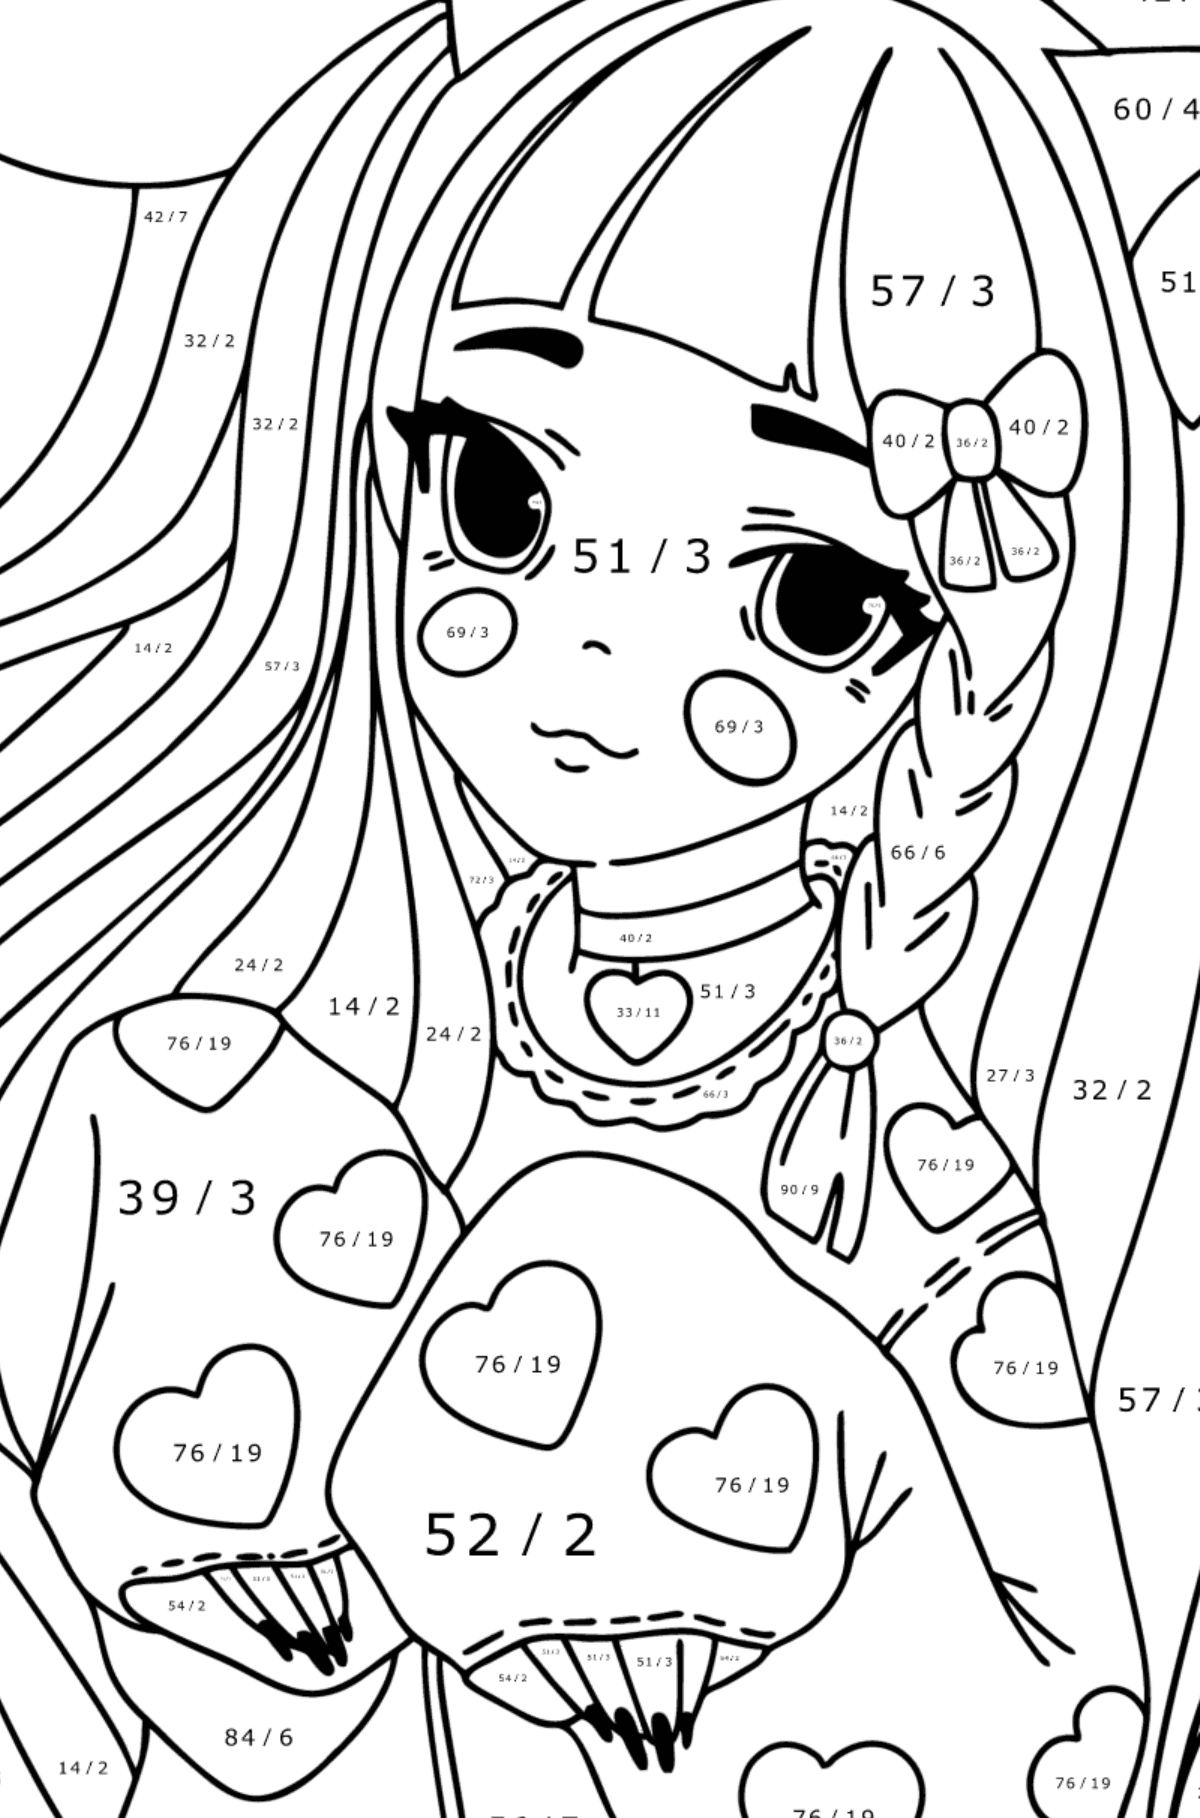 20 Free Printable Anime Girl Coloring Pages  EverFreeColoringcom